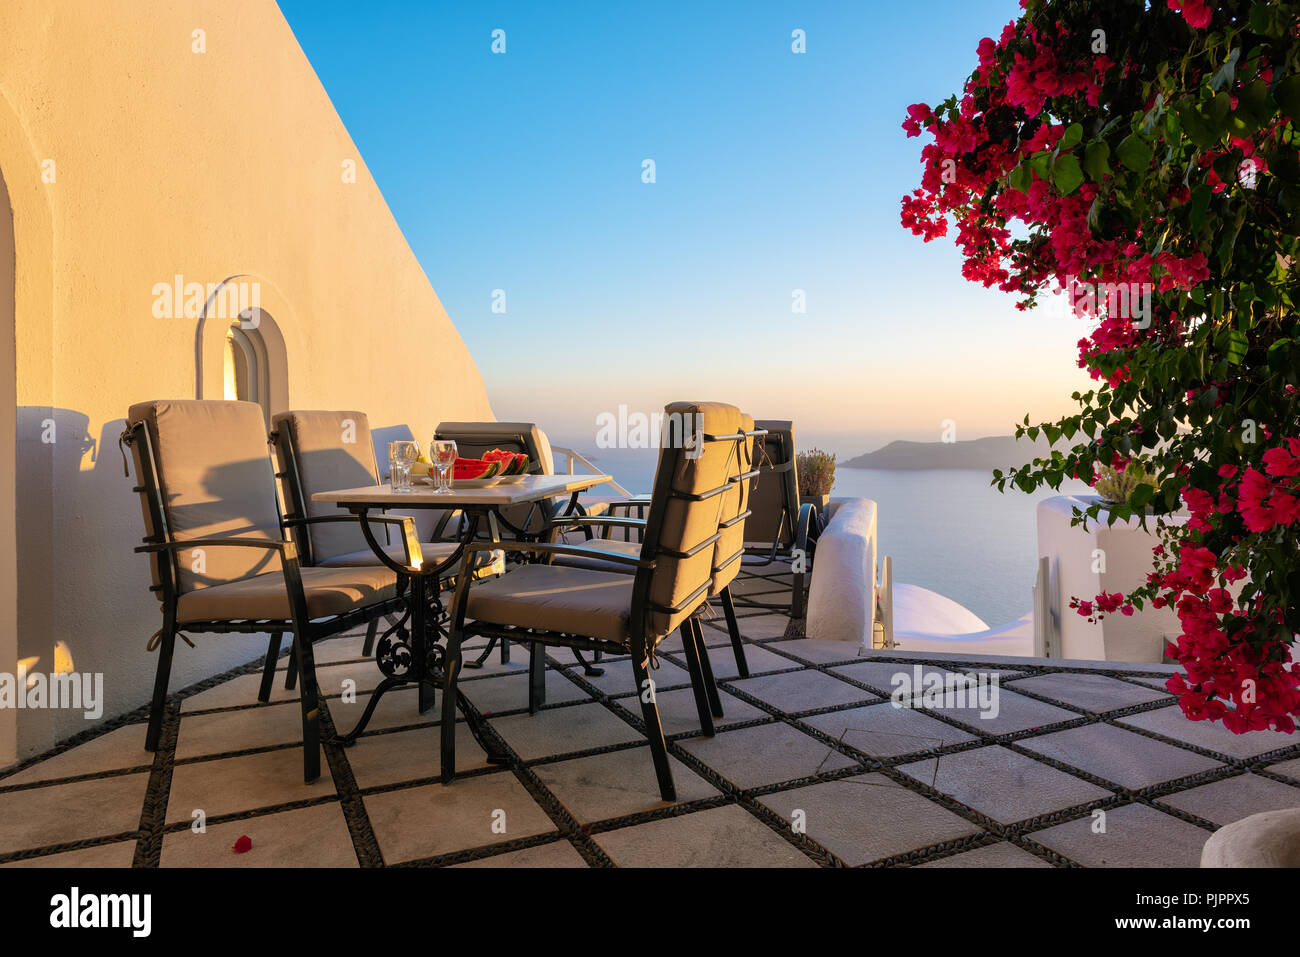 Patio with table and chairs decorated with beautiful bougainvillea flowers at Santorini island, Greece Stock Photo